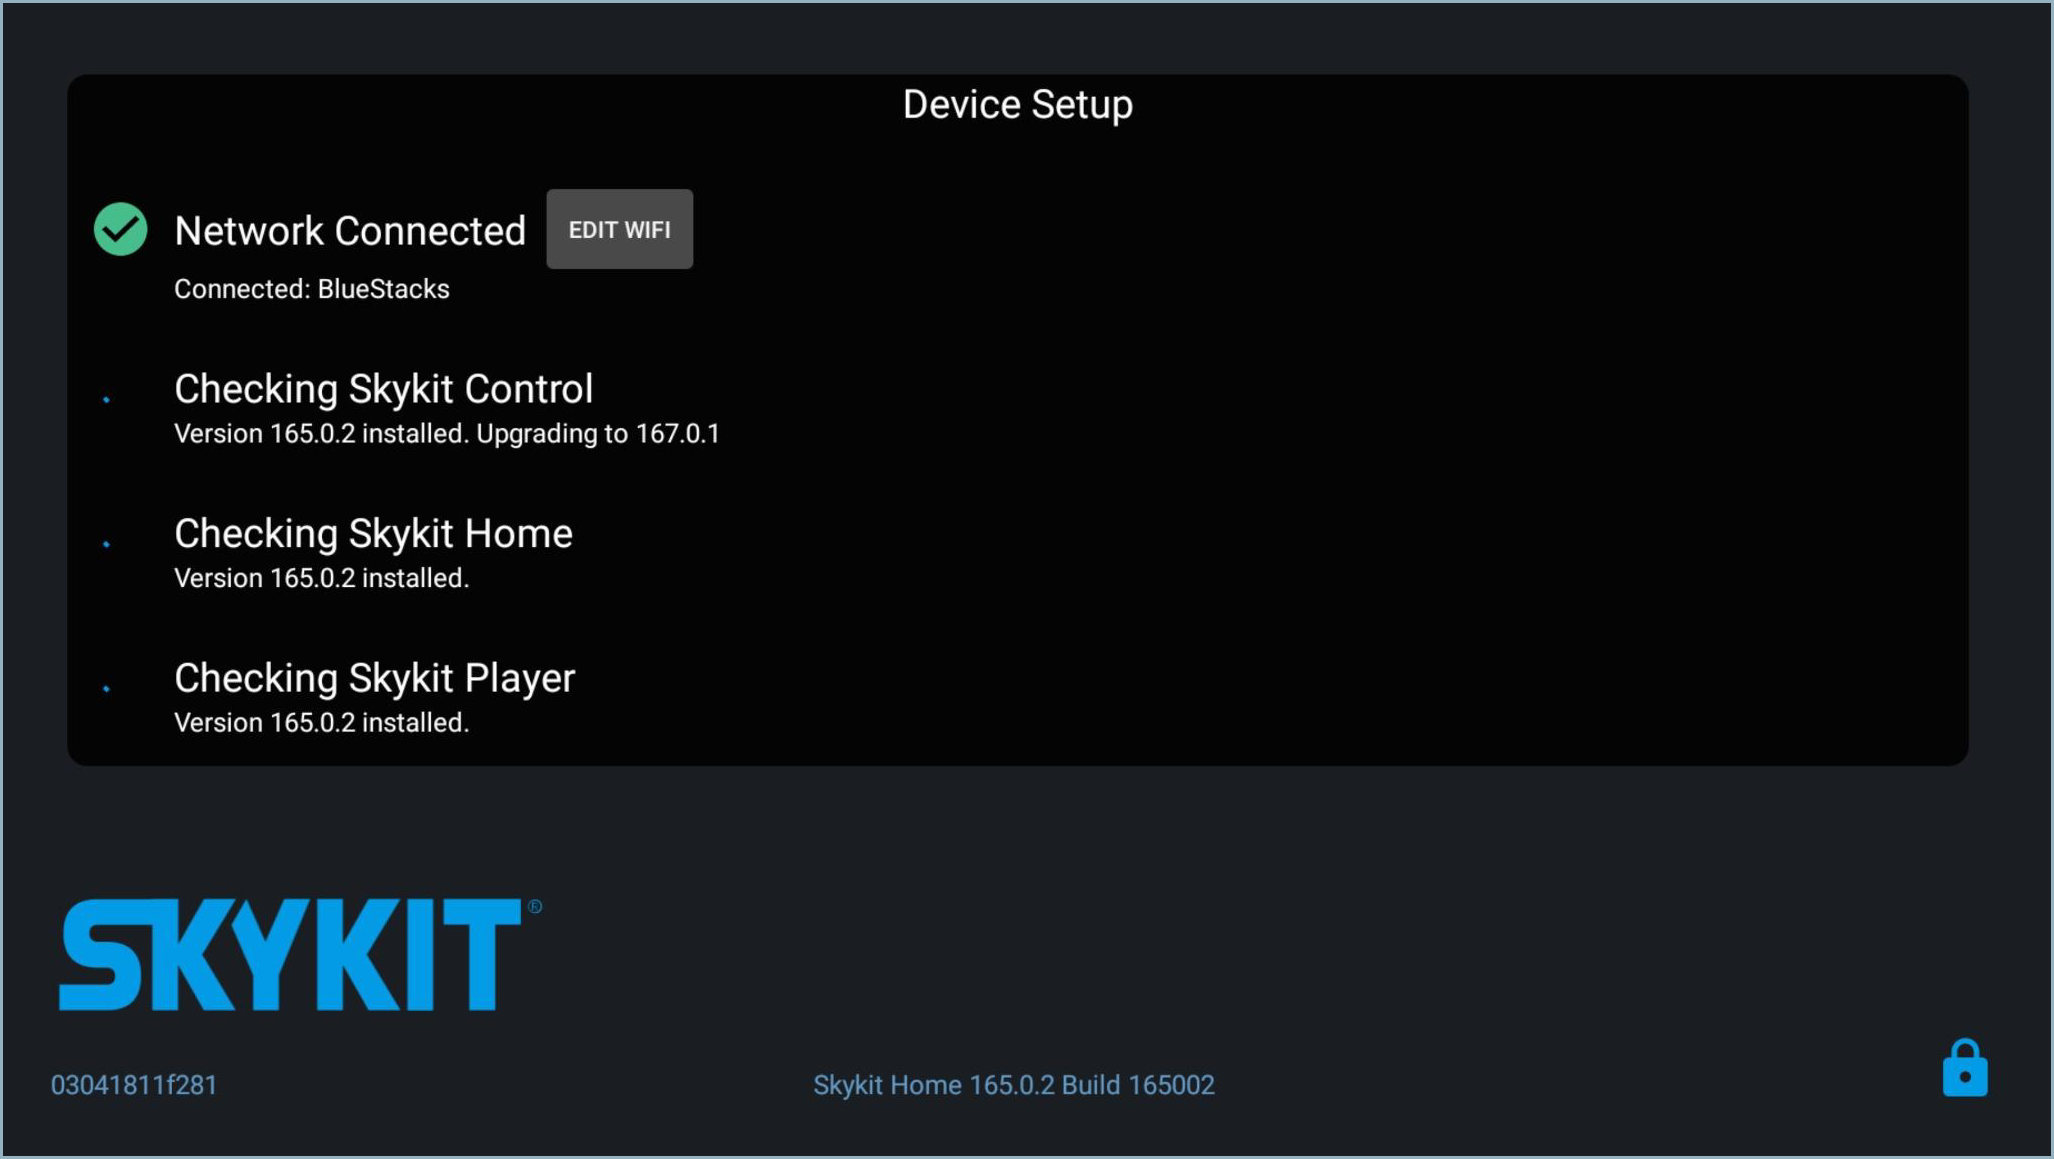 Device Setup window - network connected